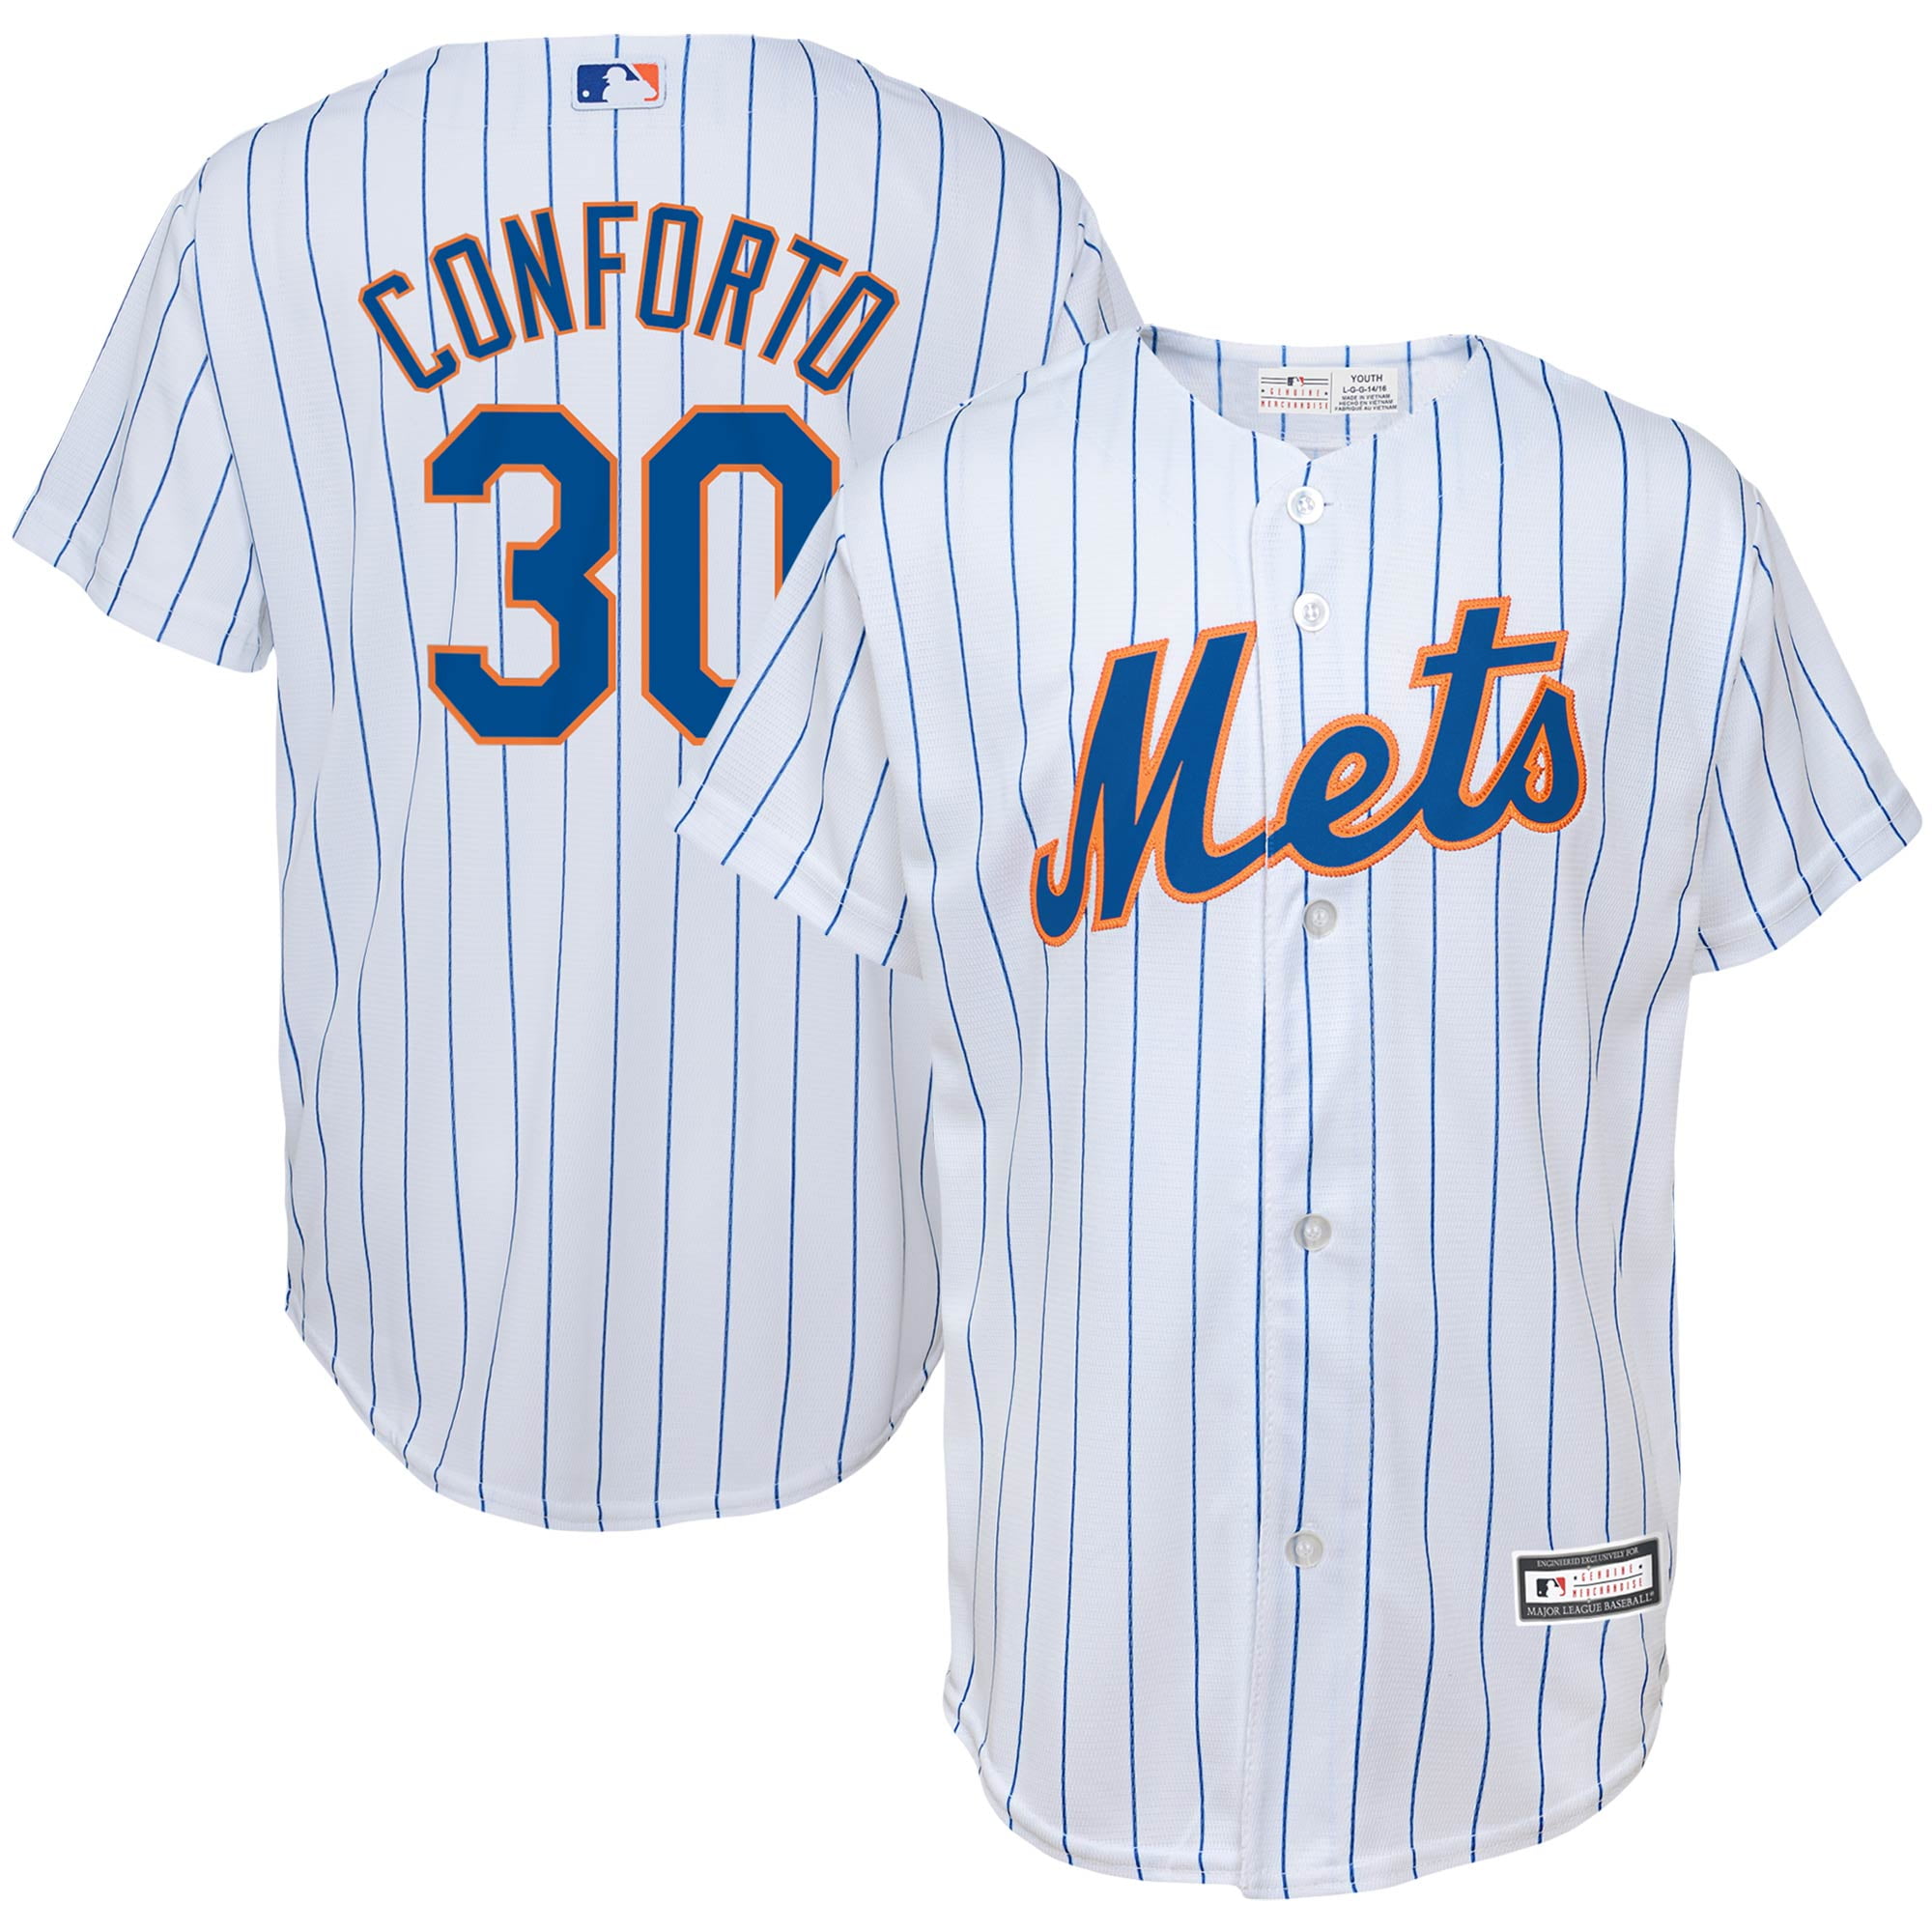 York Mets Youth Player Replica Jersey 